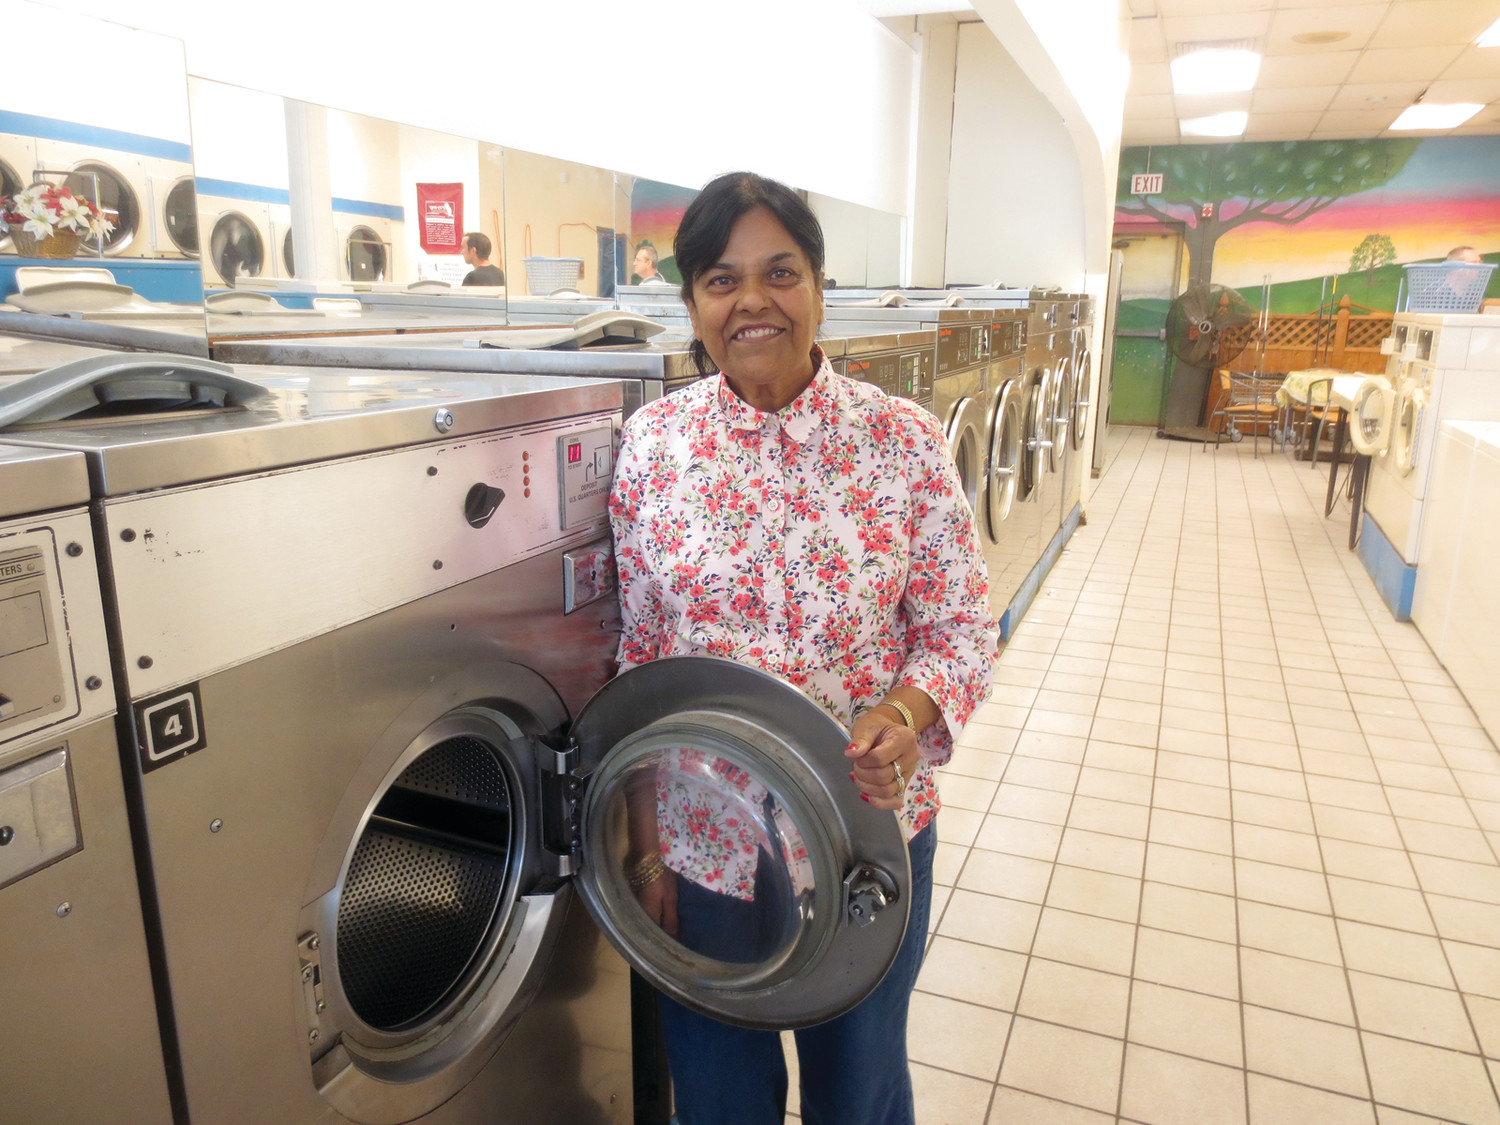 Kaushal Jain is a steady and familiar face at Jain’s Laundry, the family-owned business that she and her husband Sripal have operated for thirty years.